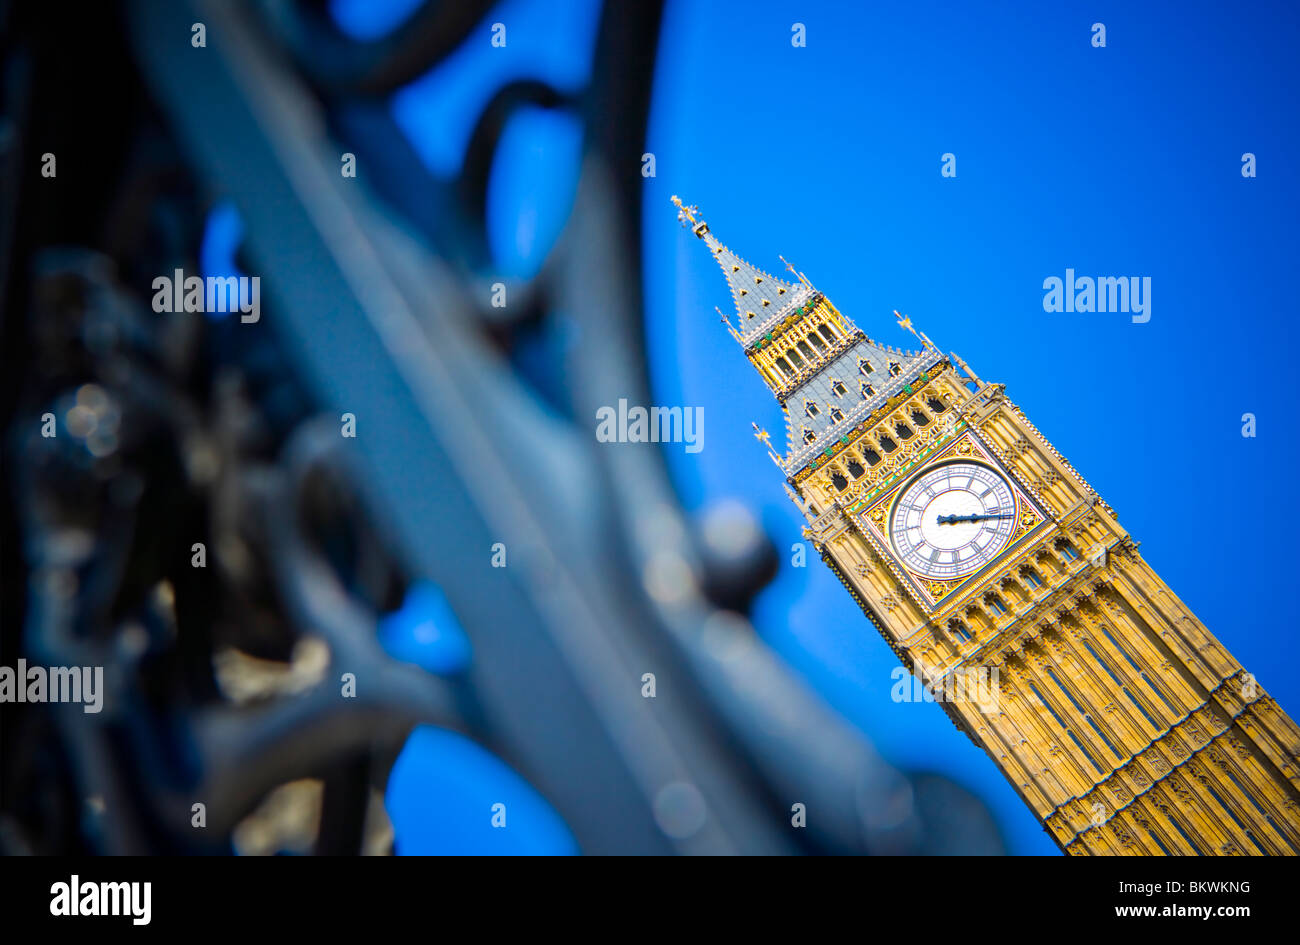 SHALLOW FOCUS ABSTRACT IMAGE OF THE CLOCK TOWER KNOWN AS BIG BEN LONDON Stock Photo